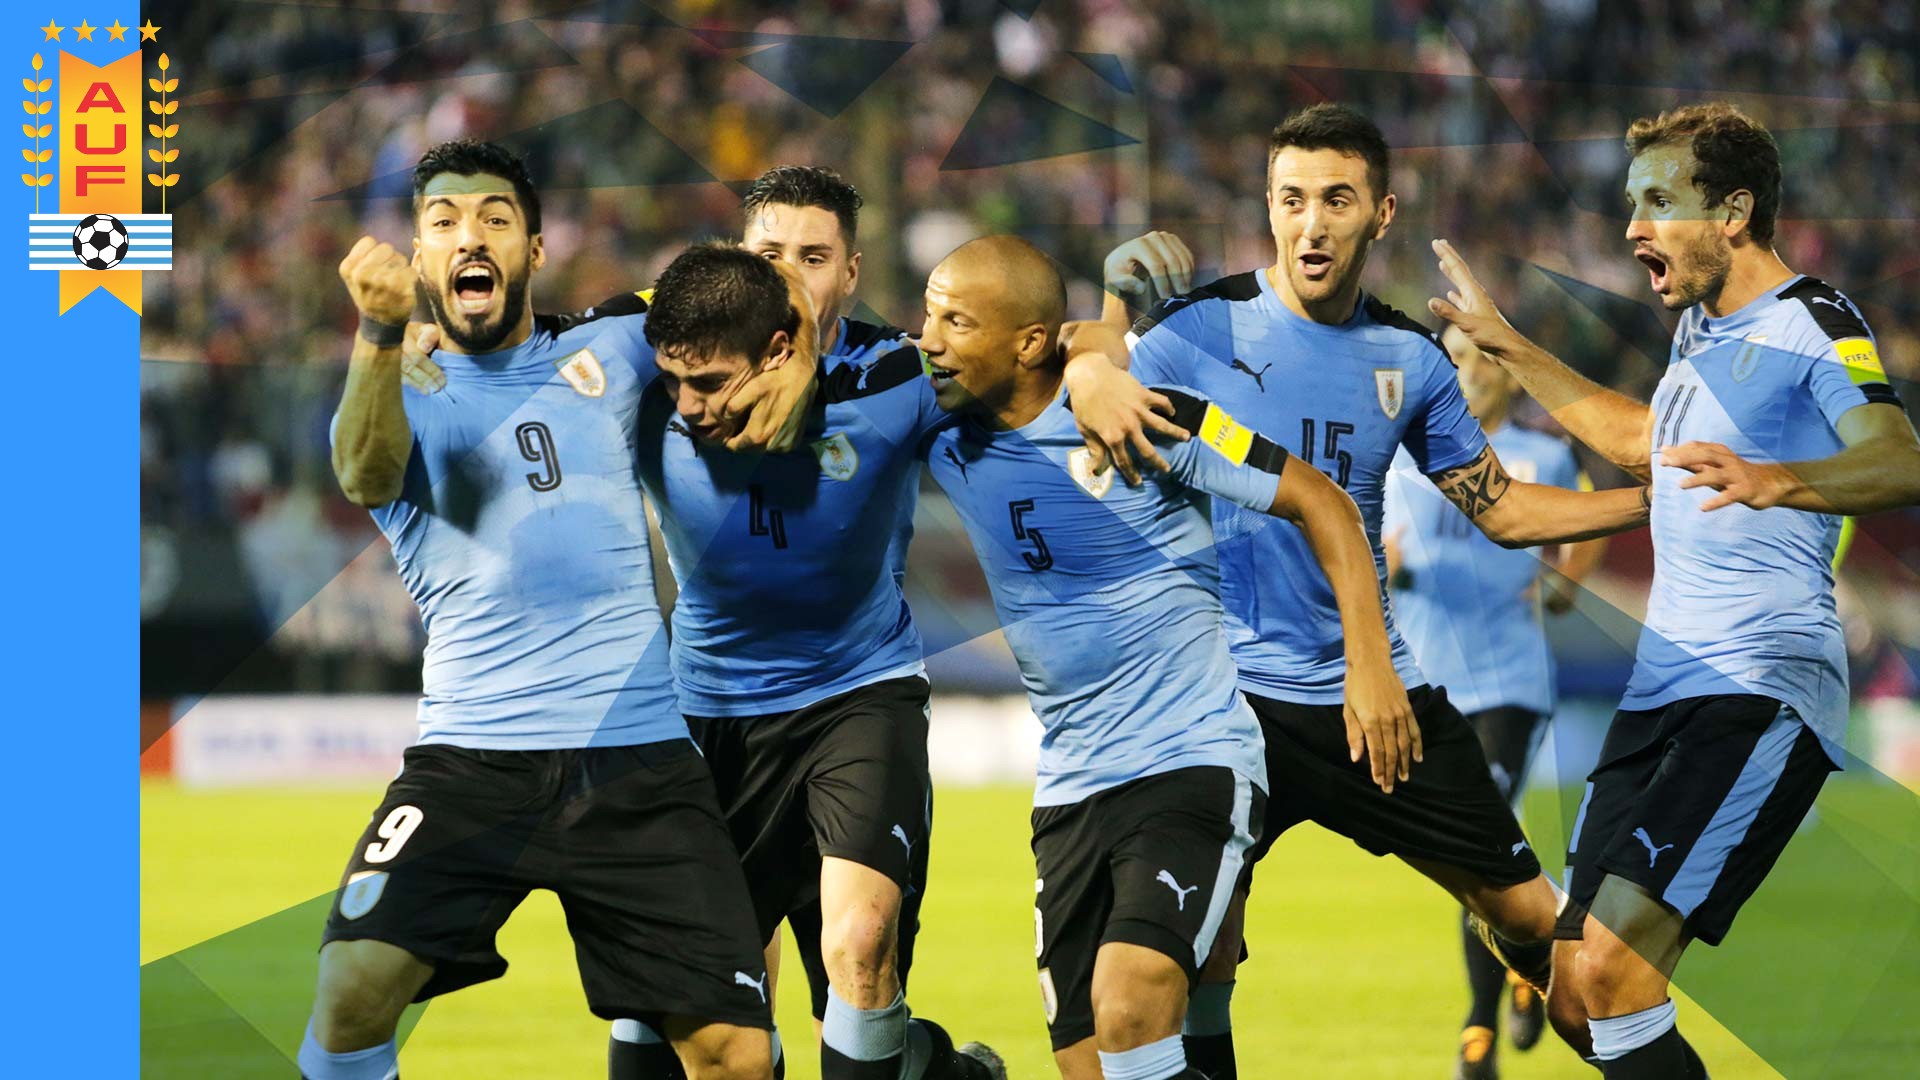 Uruguay Football Squad Wallpaper With Resolution 1920X1080 pixel. You can make this wallpaper for your Mac or Windows Desktop Background, iPhone, Android or Tablet and another Smartphone device for free